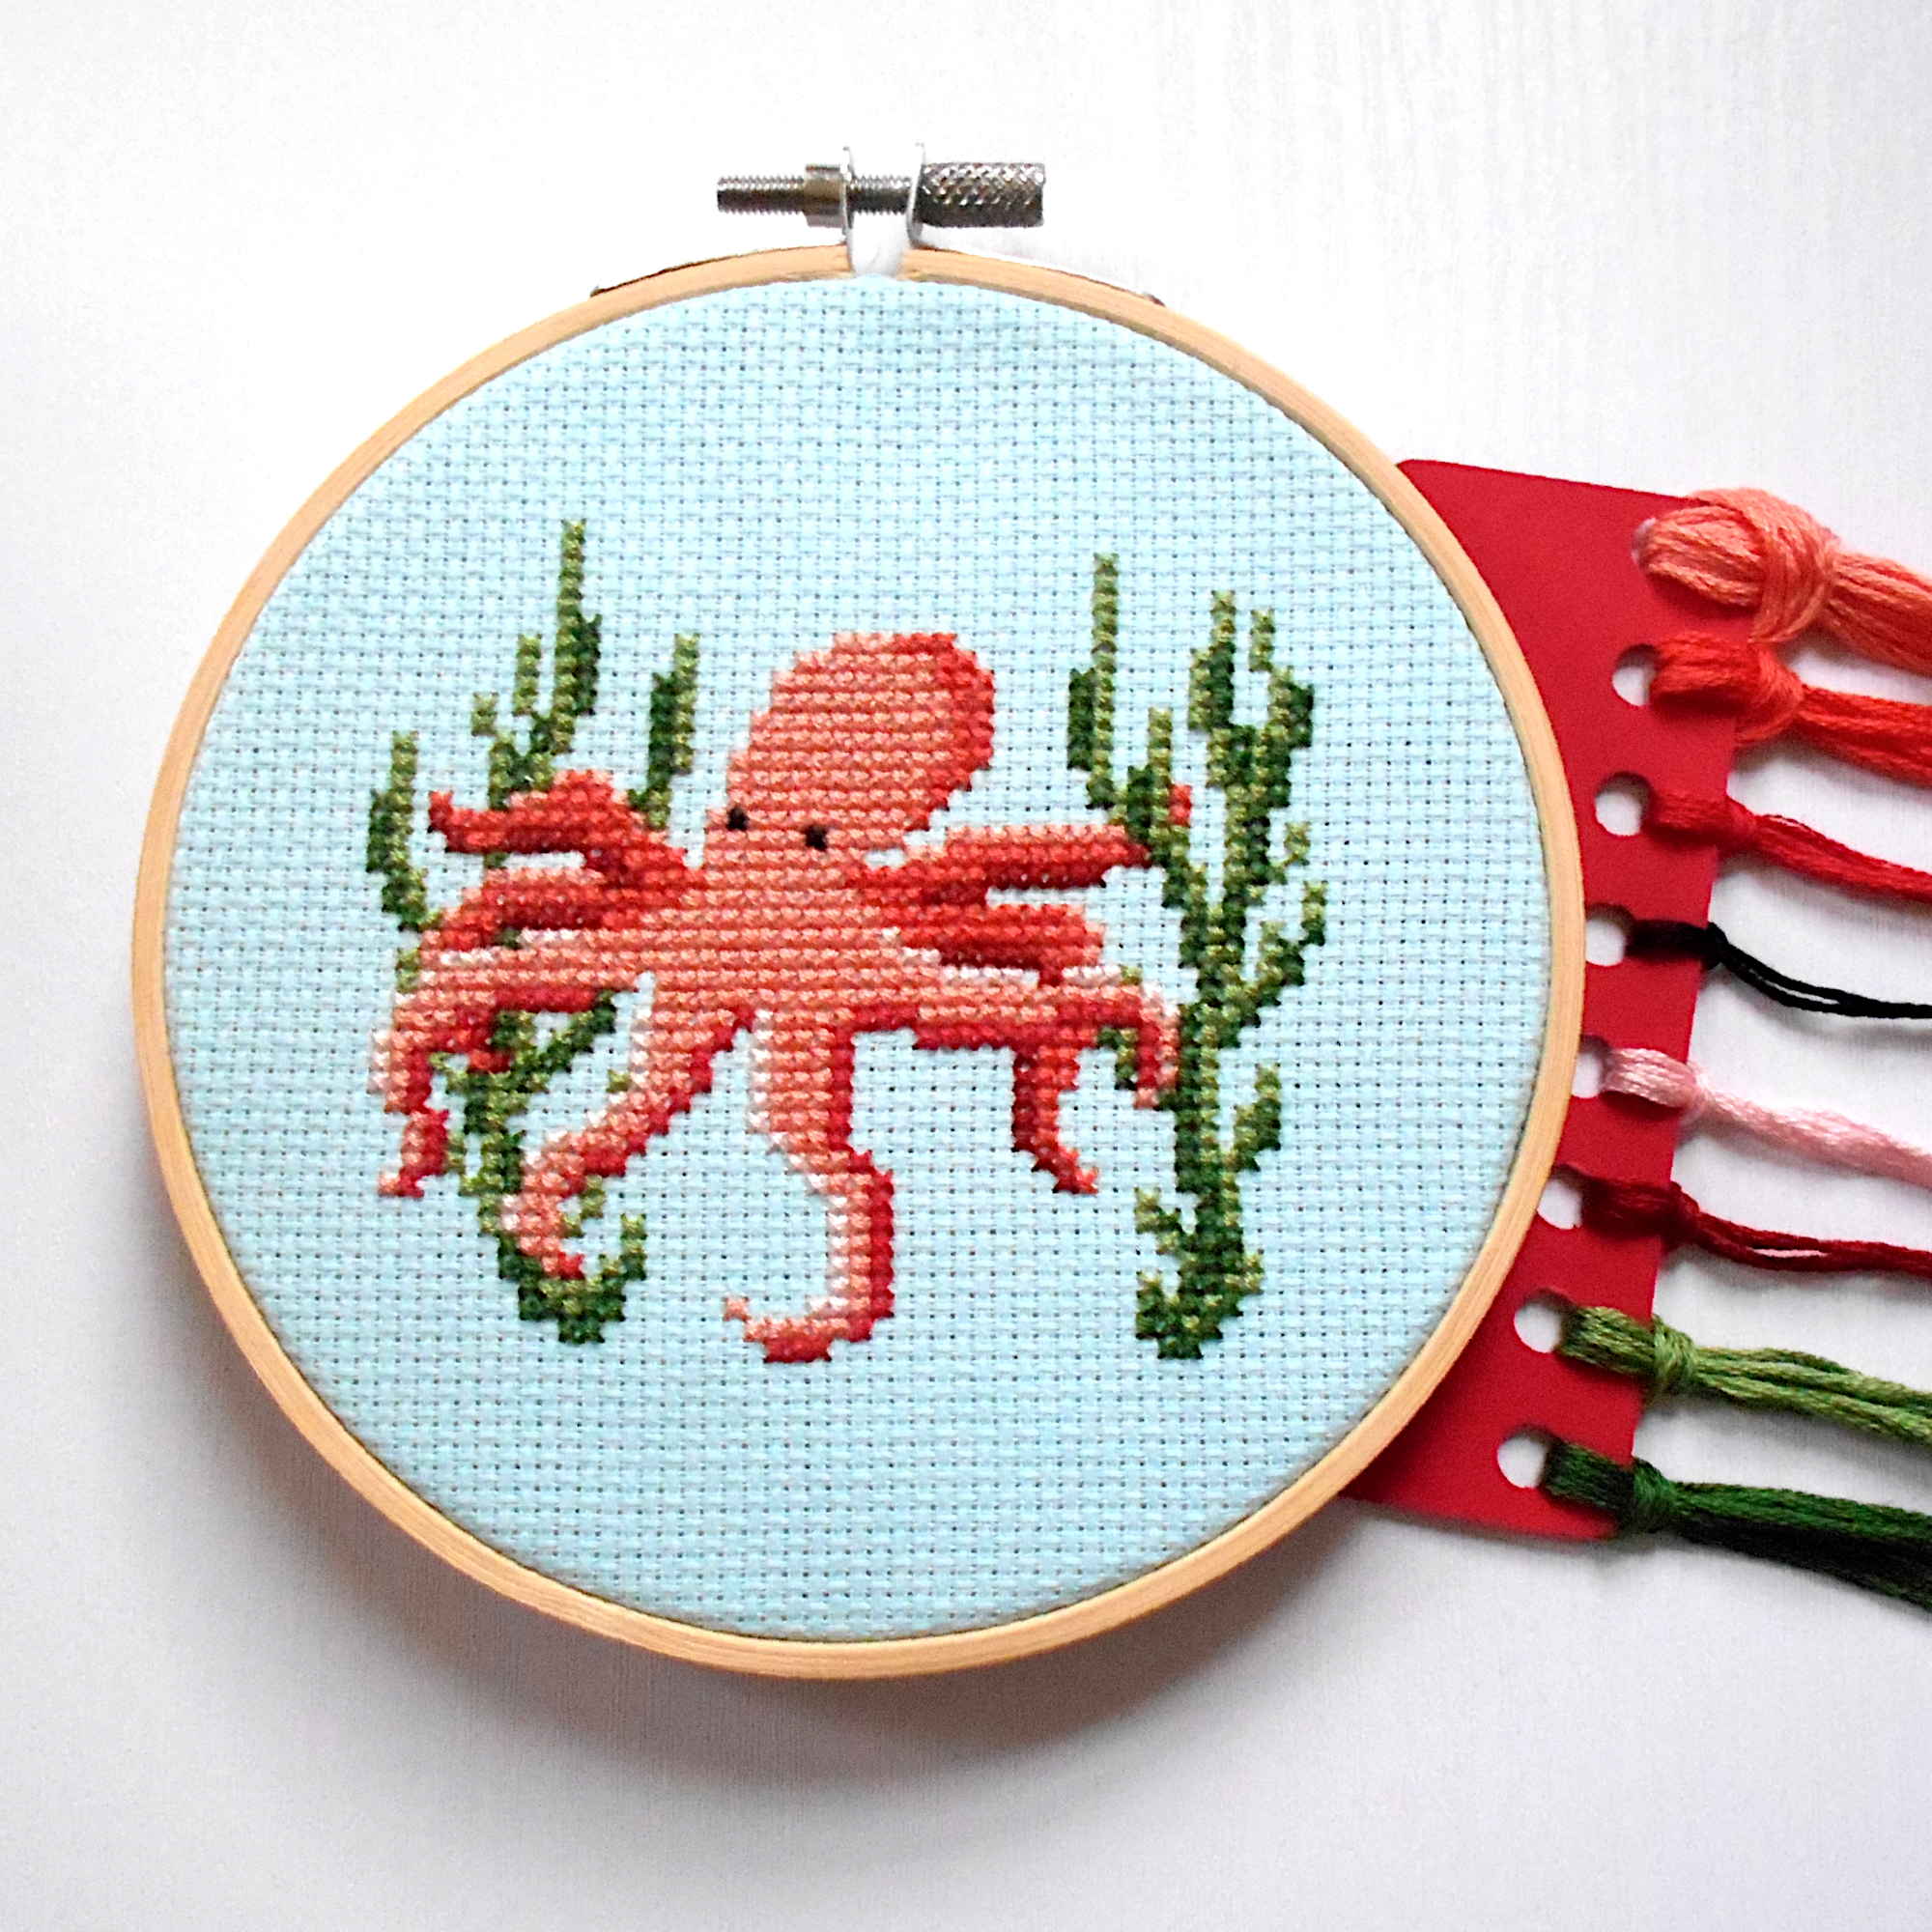 Octopus with Seaweed Cross Stitch Kit